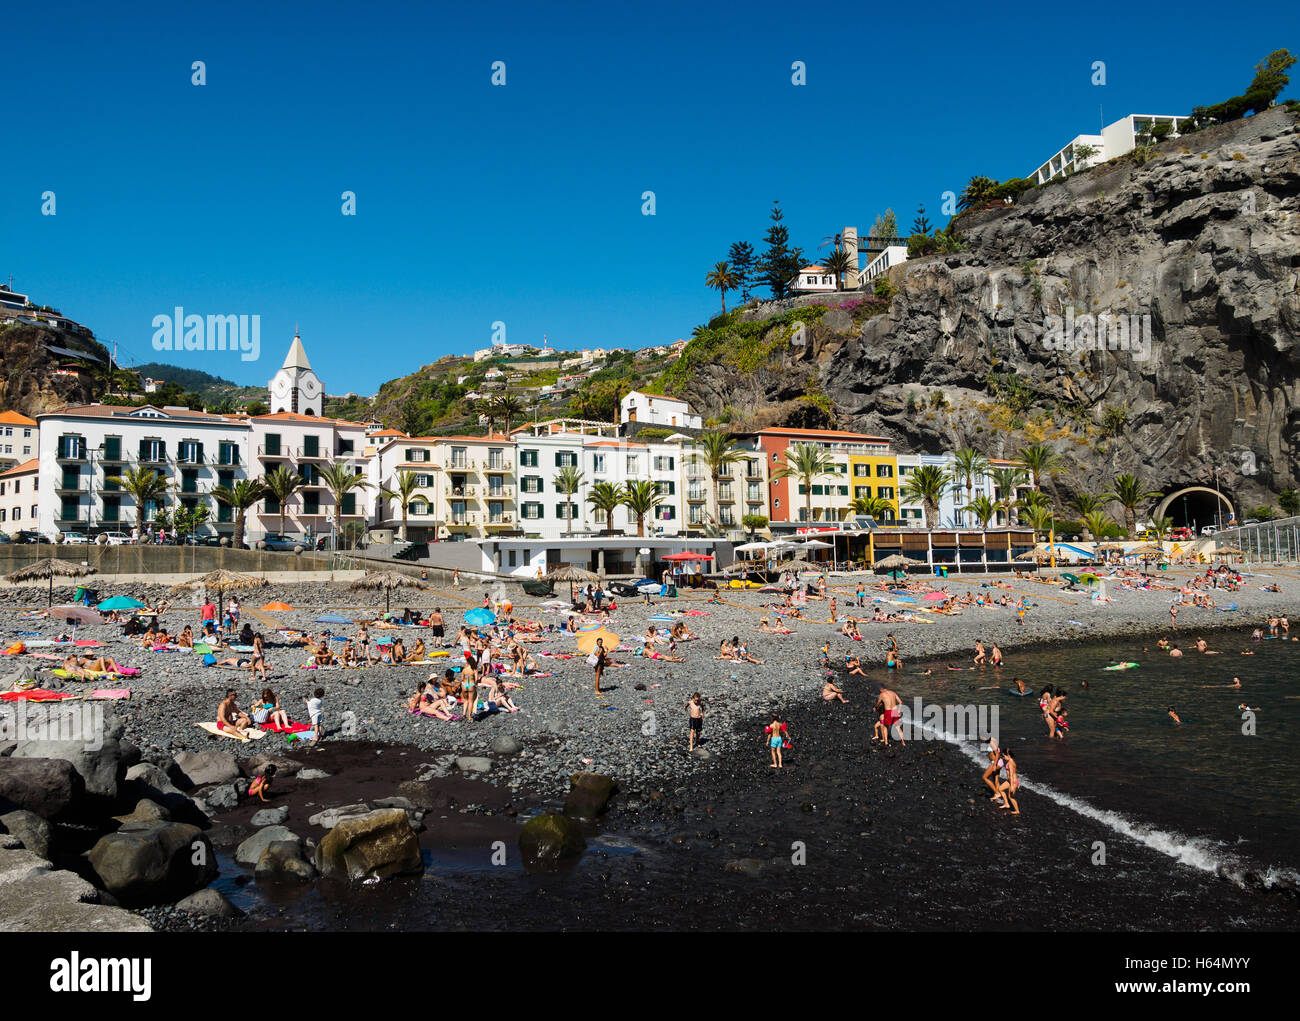 Tourists enjoy the beach of Ponta do Sol with the Enotel hotel on the Portuguese island of Madeira Stock Photo